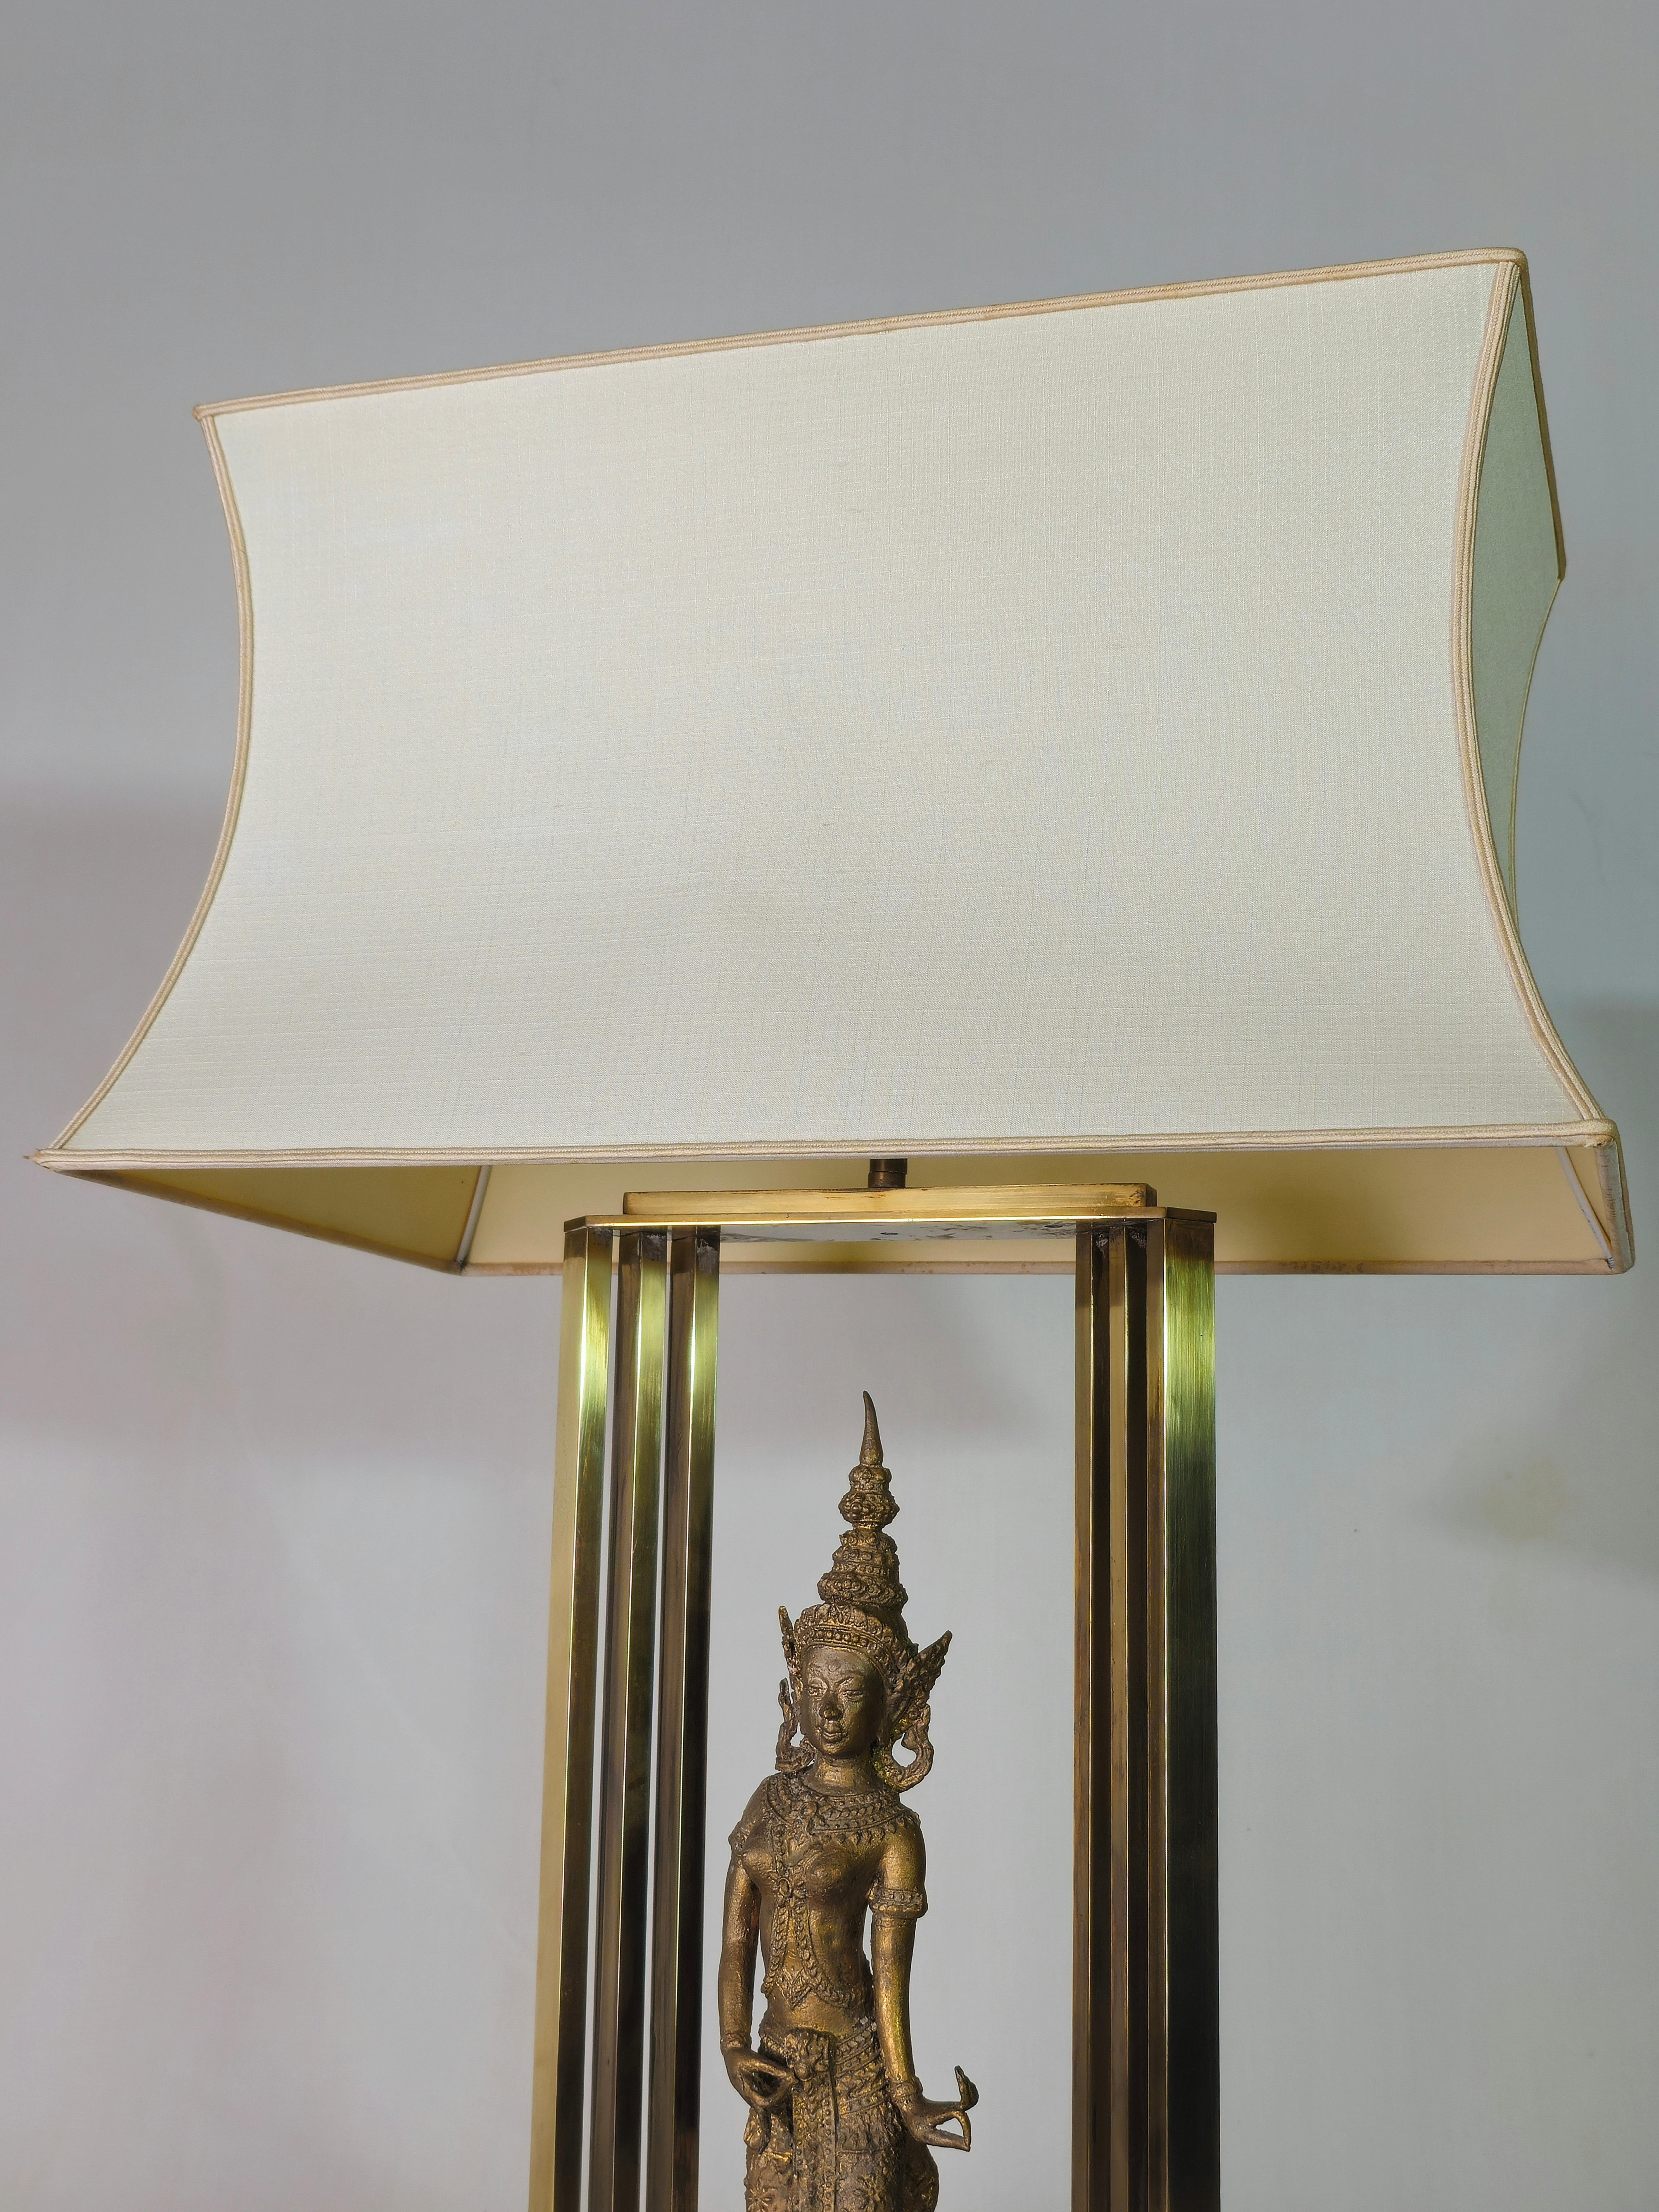 20th Century Table Lamps Brass Midcentury Modern Design Italy 1960/70s For Sale